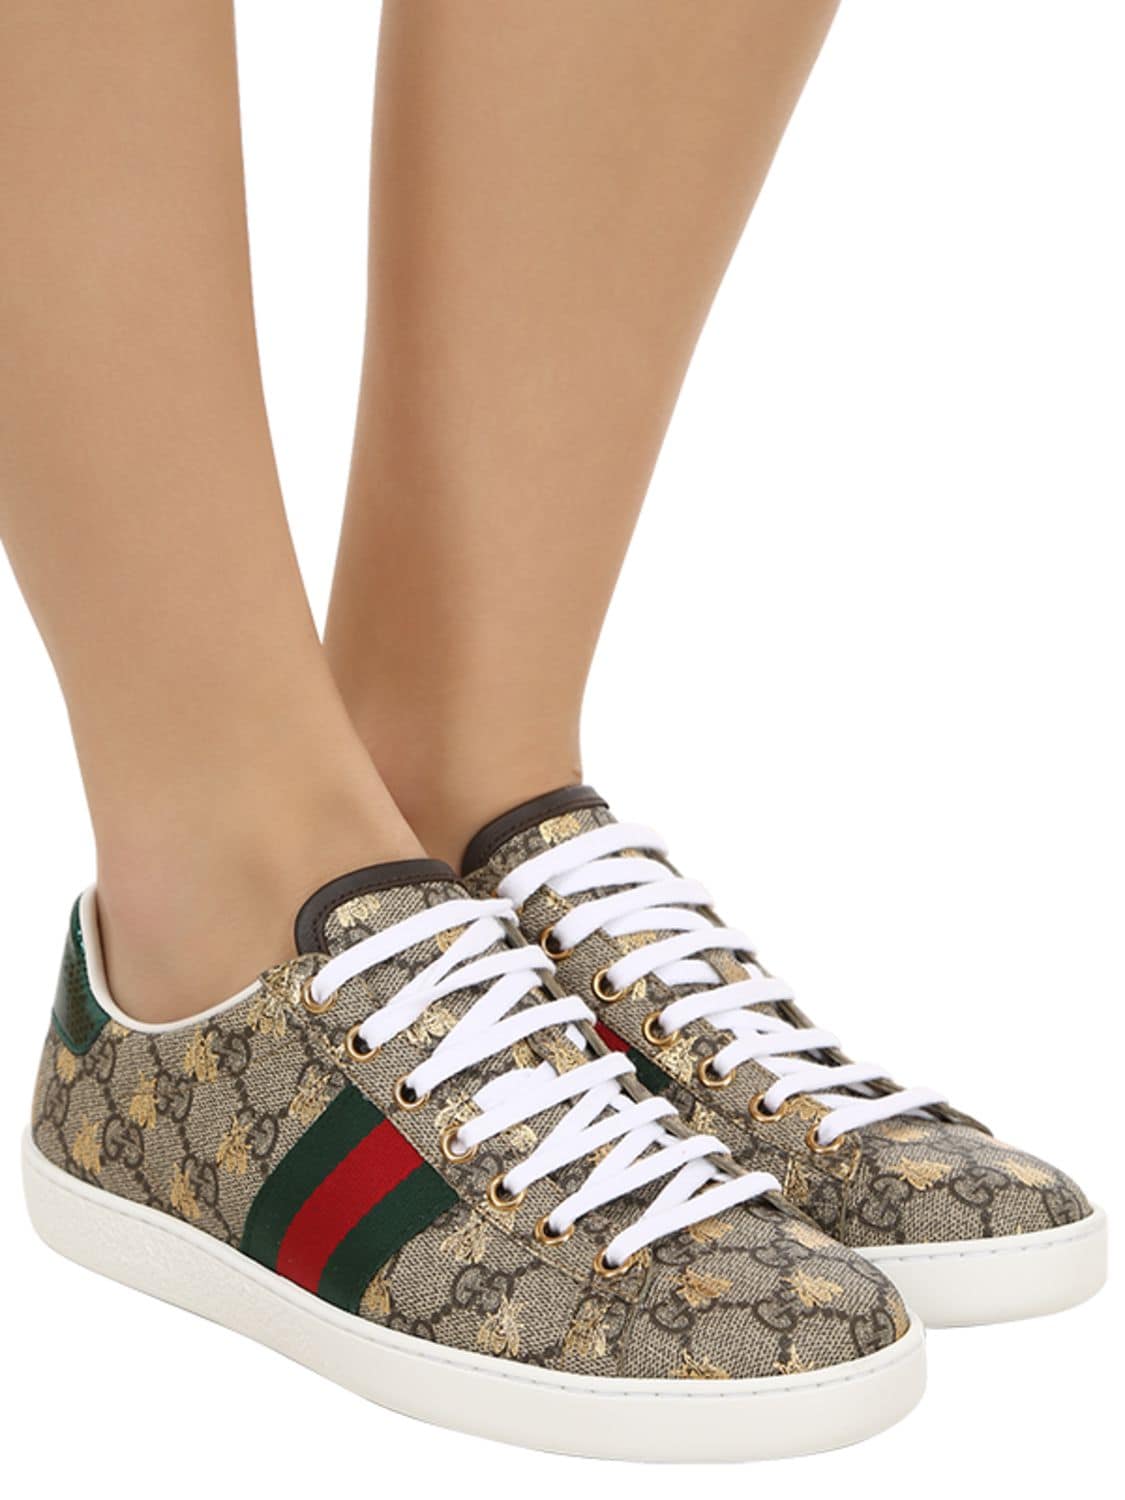 Gucci Women's Ace GG Supreme Sneaker with Bees, Beige, GG Canvas